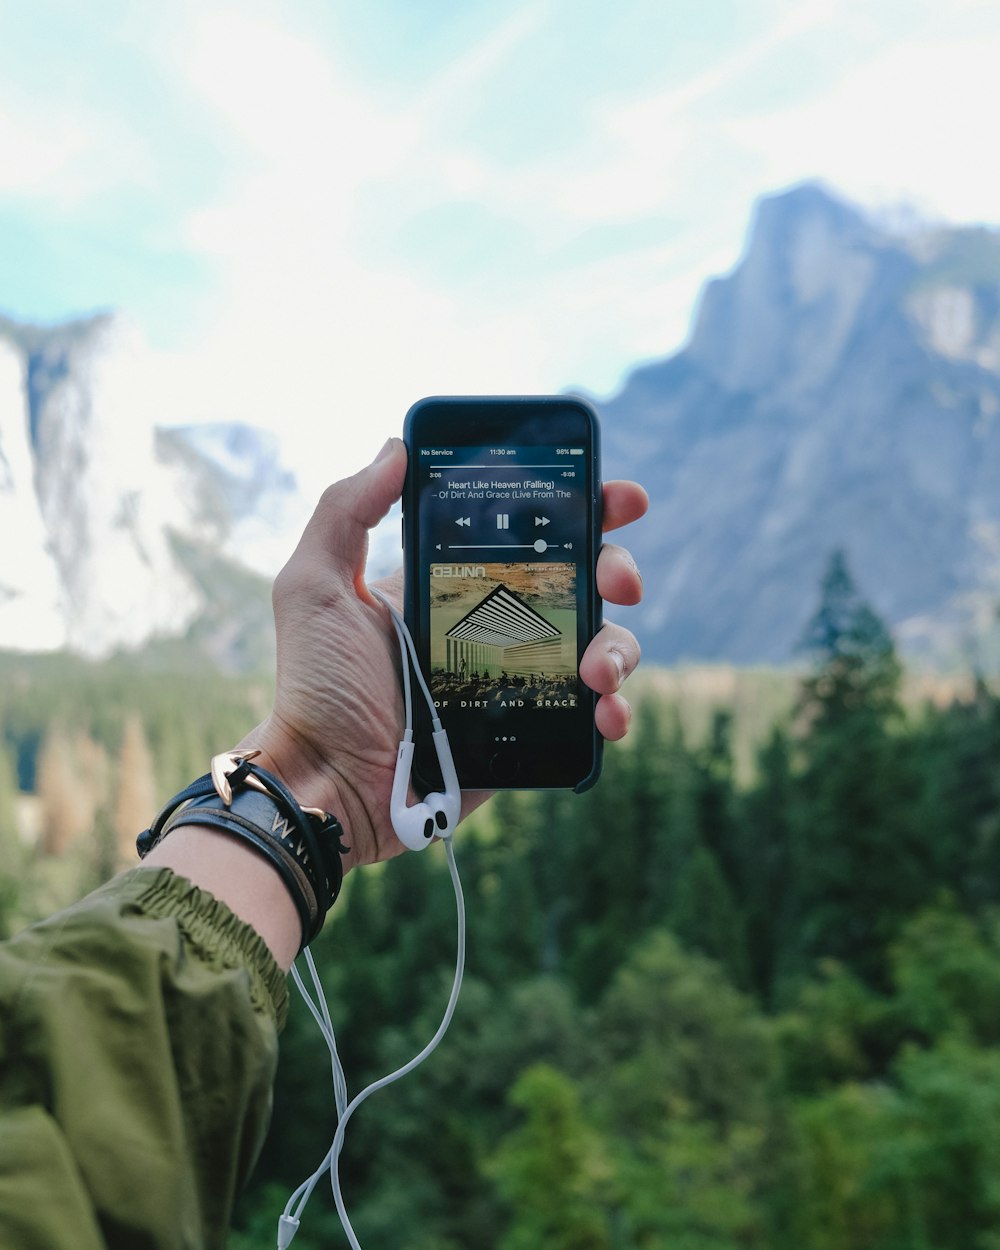 A person's outstretched hand holding an iPhone with a music player in the Yosemite Valley